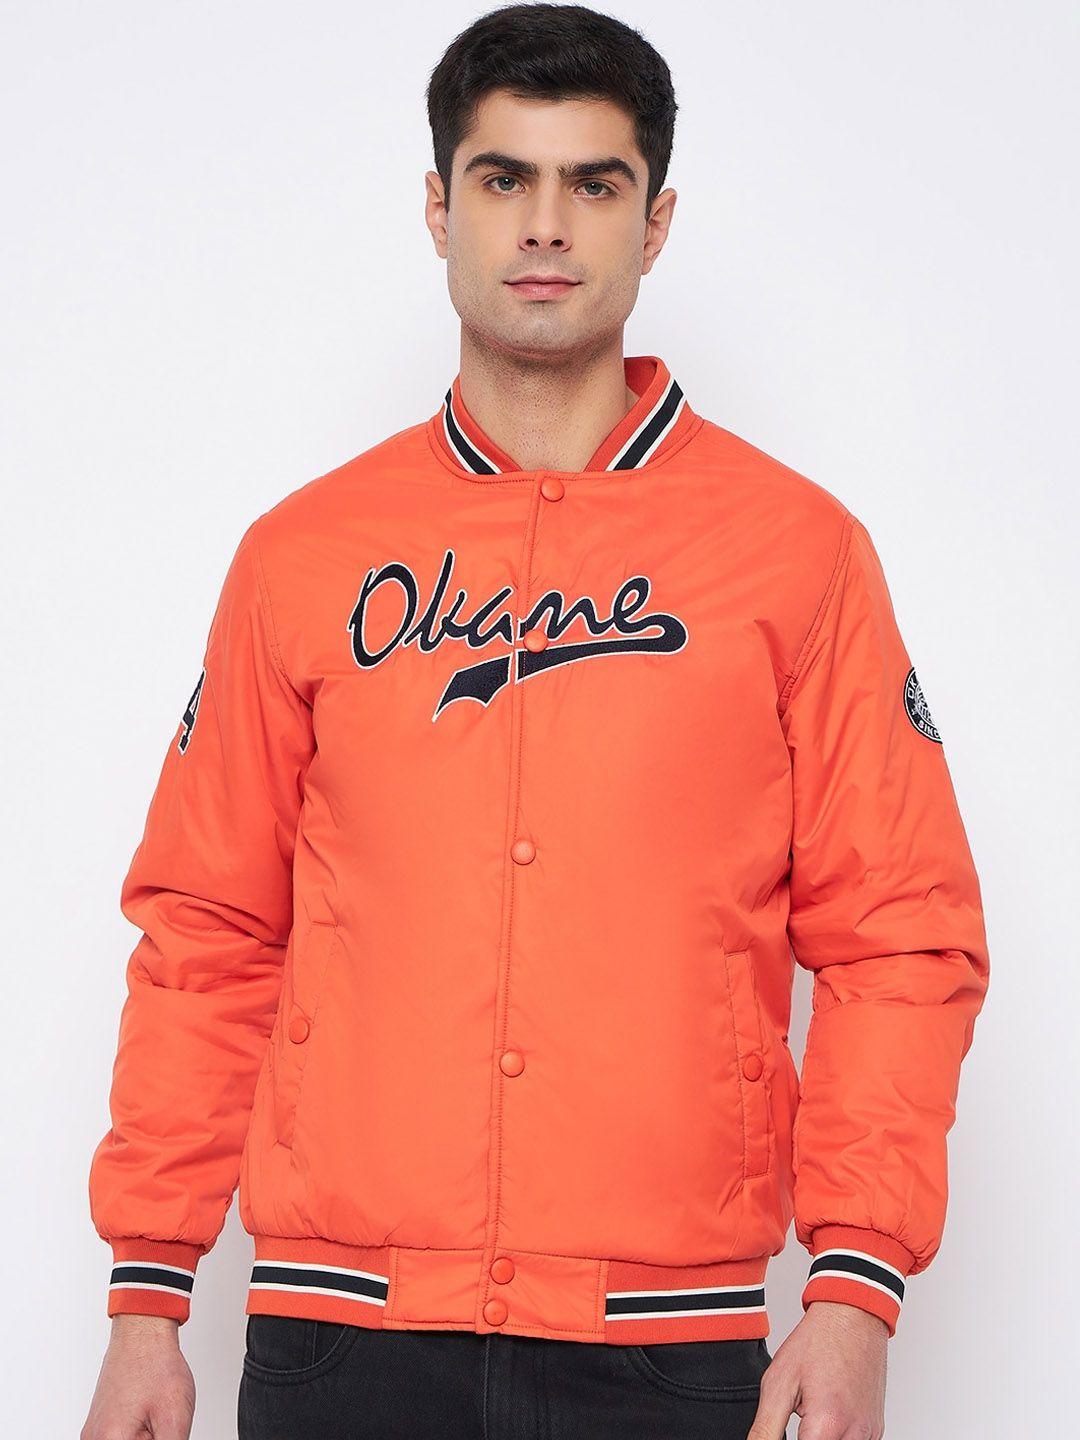 okane men lightweight bomber with embroidered jacket